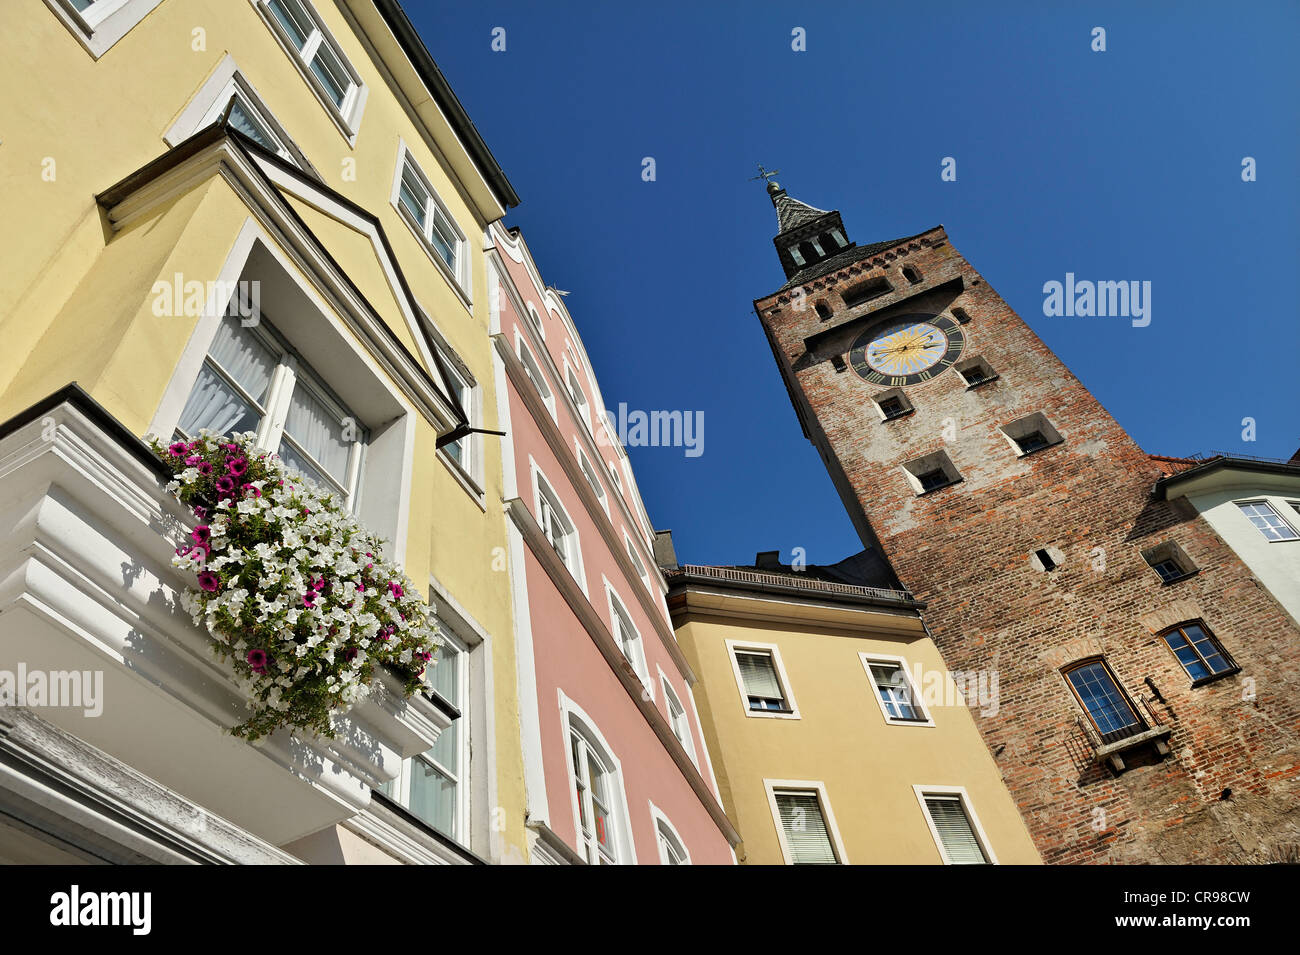 Main square with facades and Schmalzturm tower, Landsberg am Lech, Bavaria, Germany, Europe Stock Photo